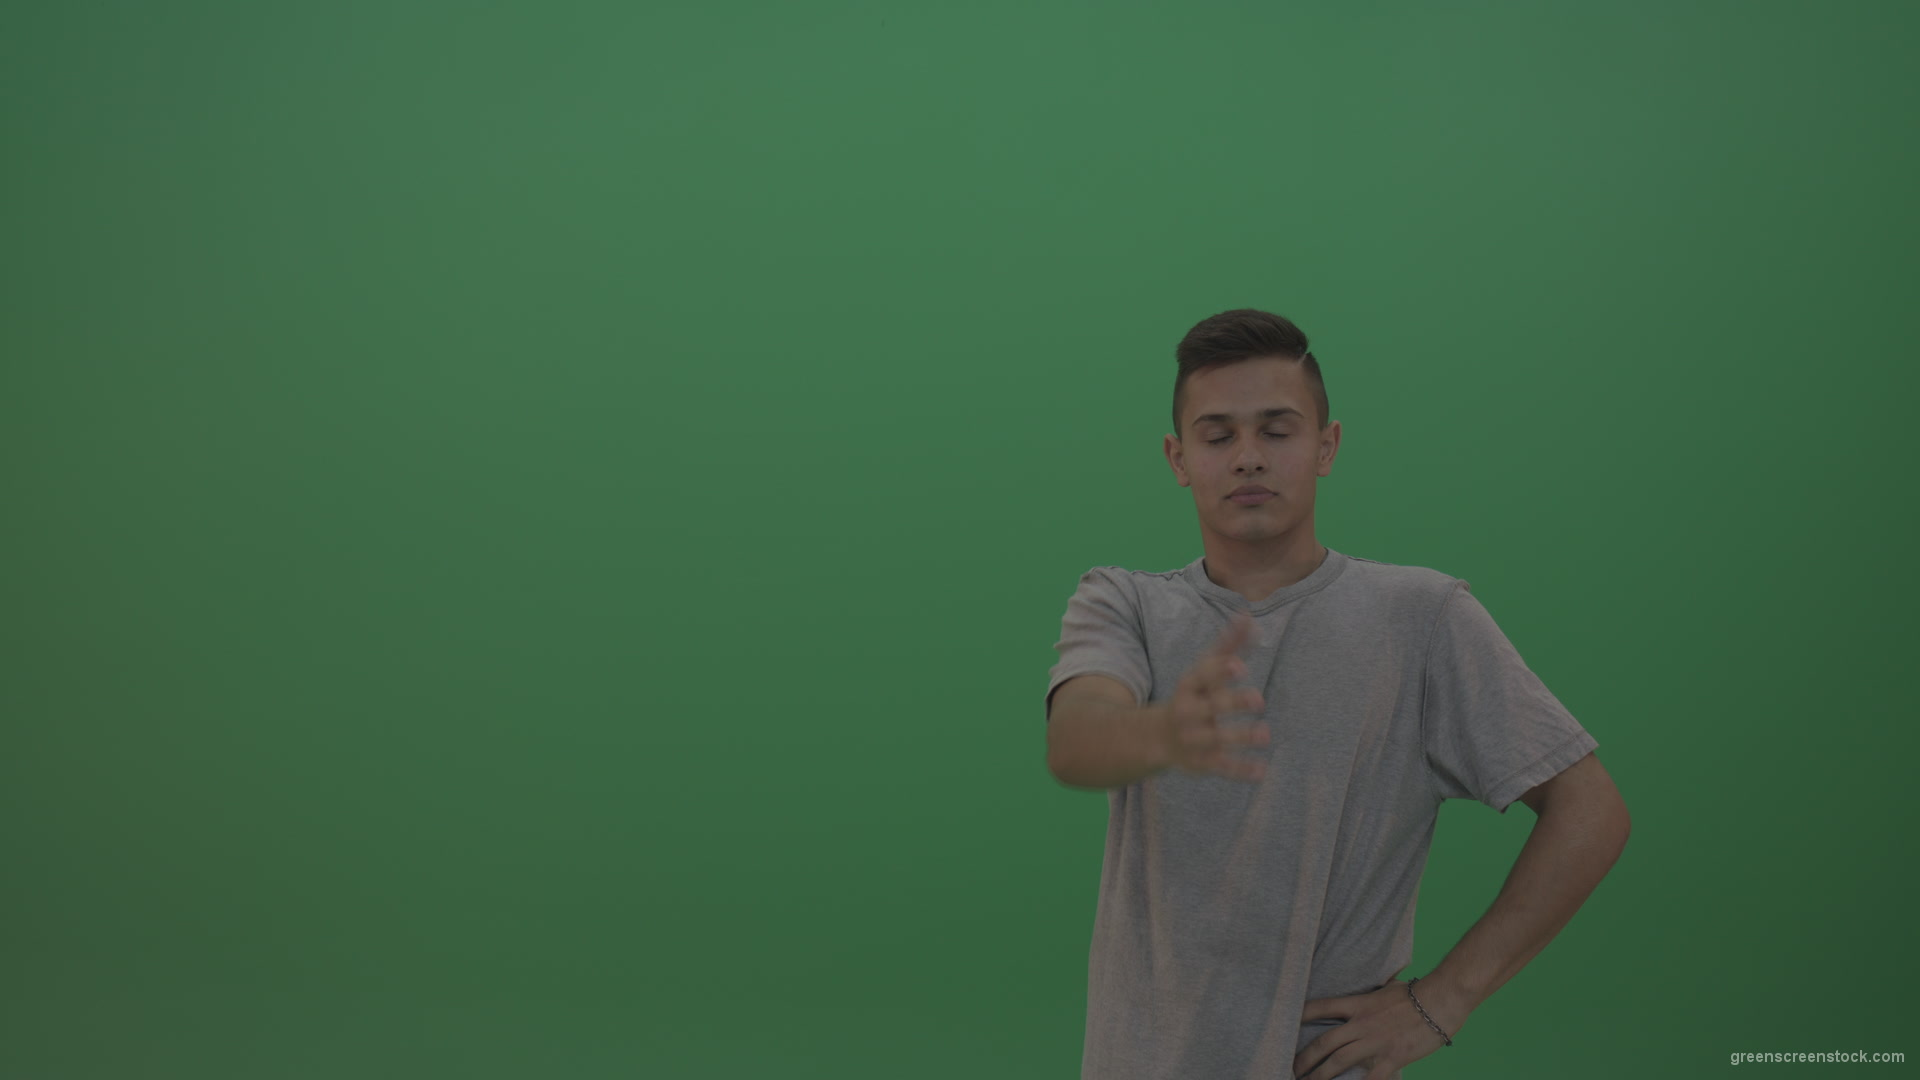 Boy-in-grey-wear-expresses-disappointment-over-green-screen-background_009 Green Screen Stock